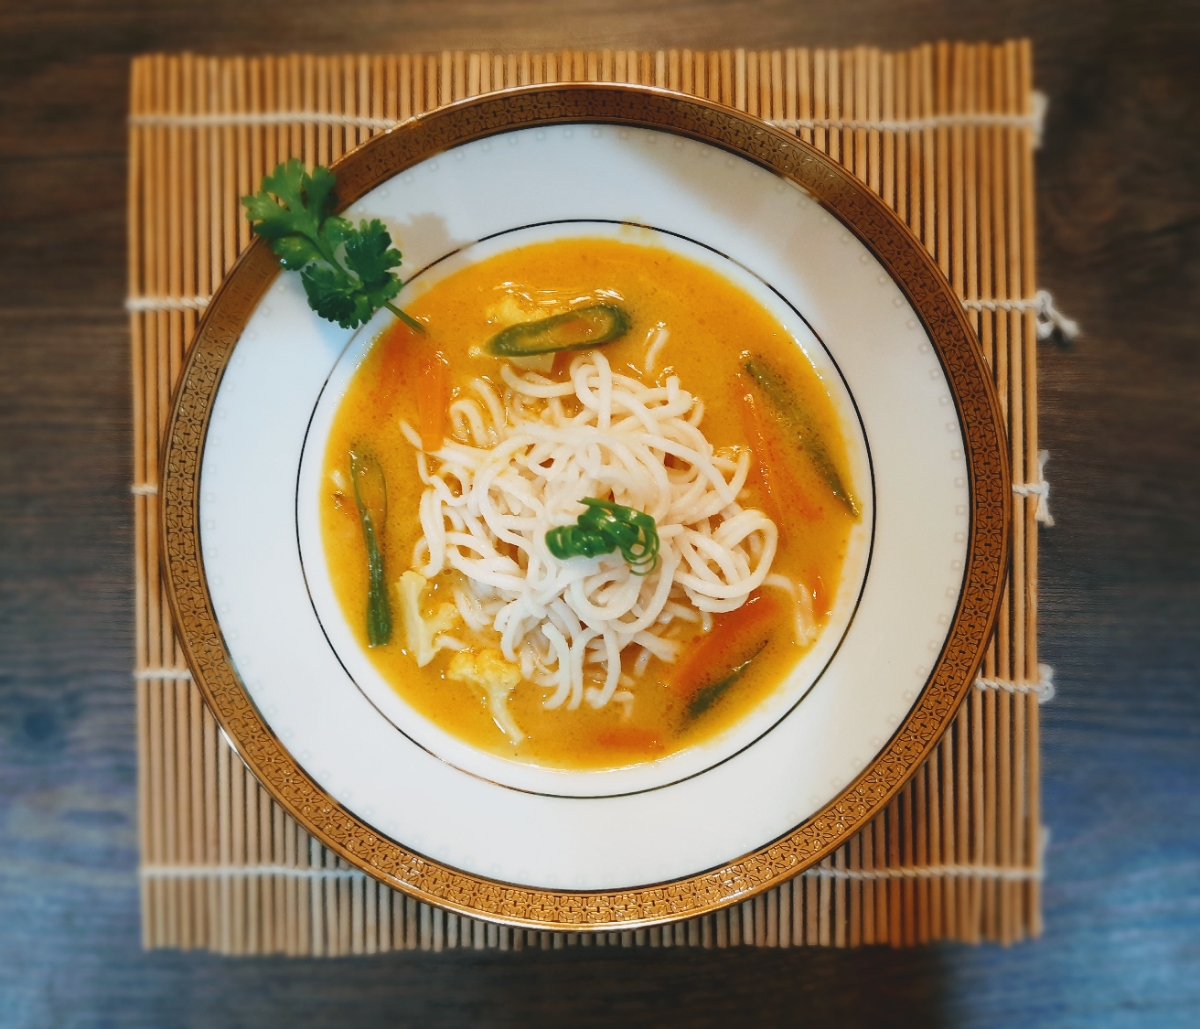 Tangy Asian Broth with Noodles